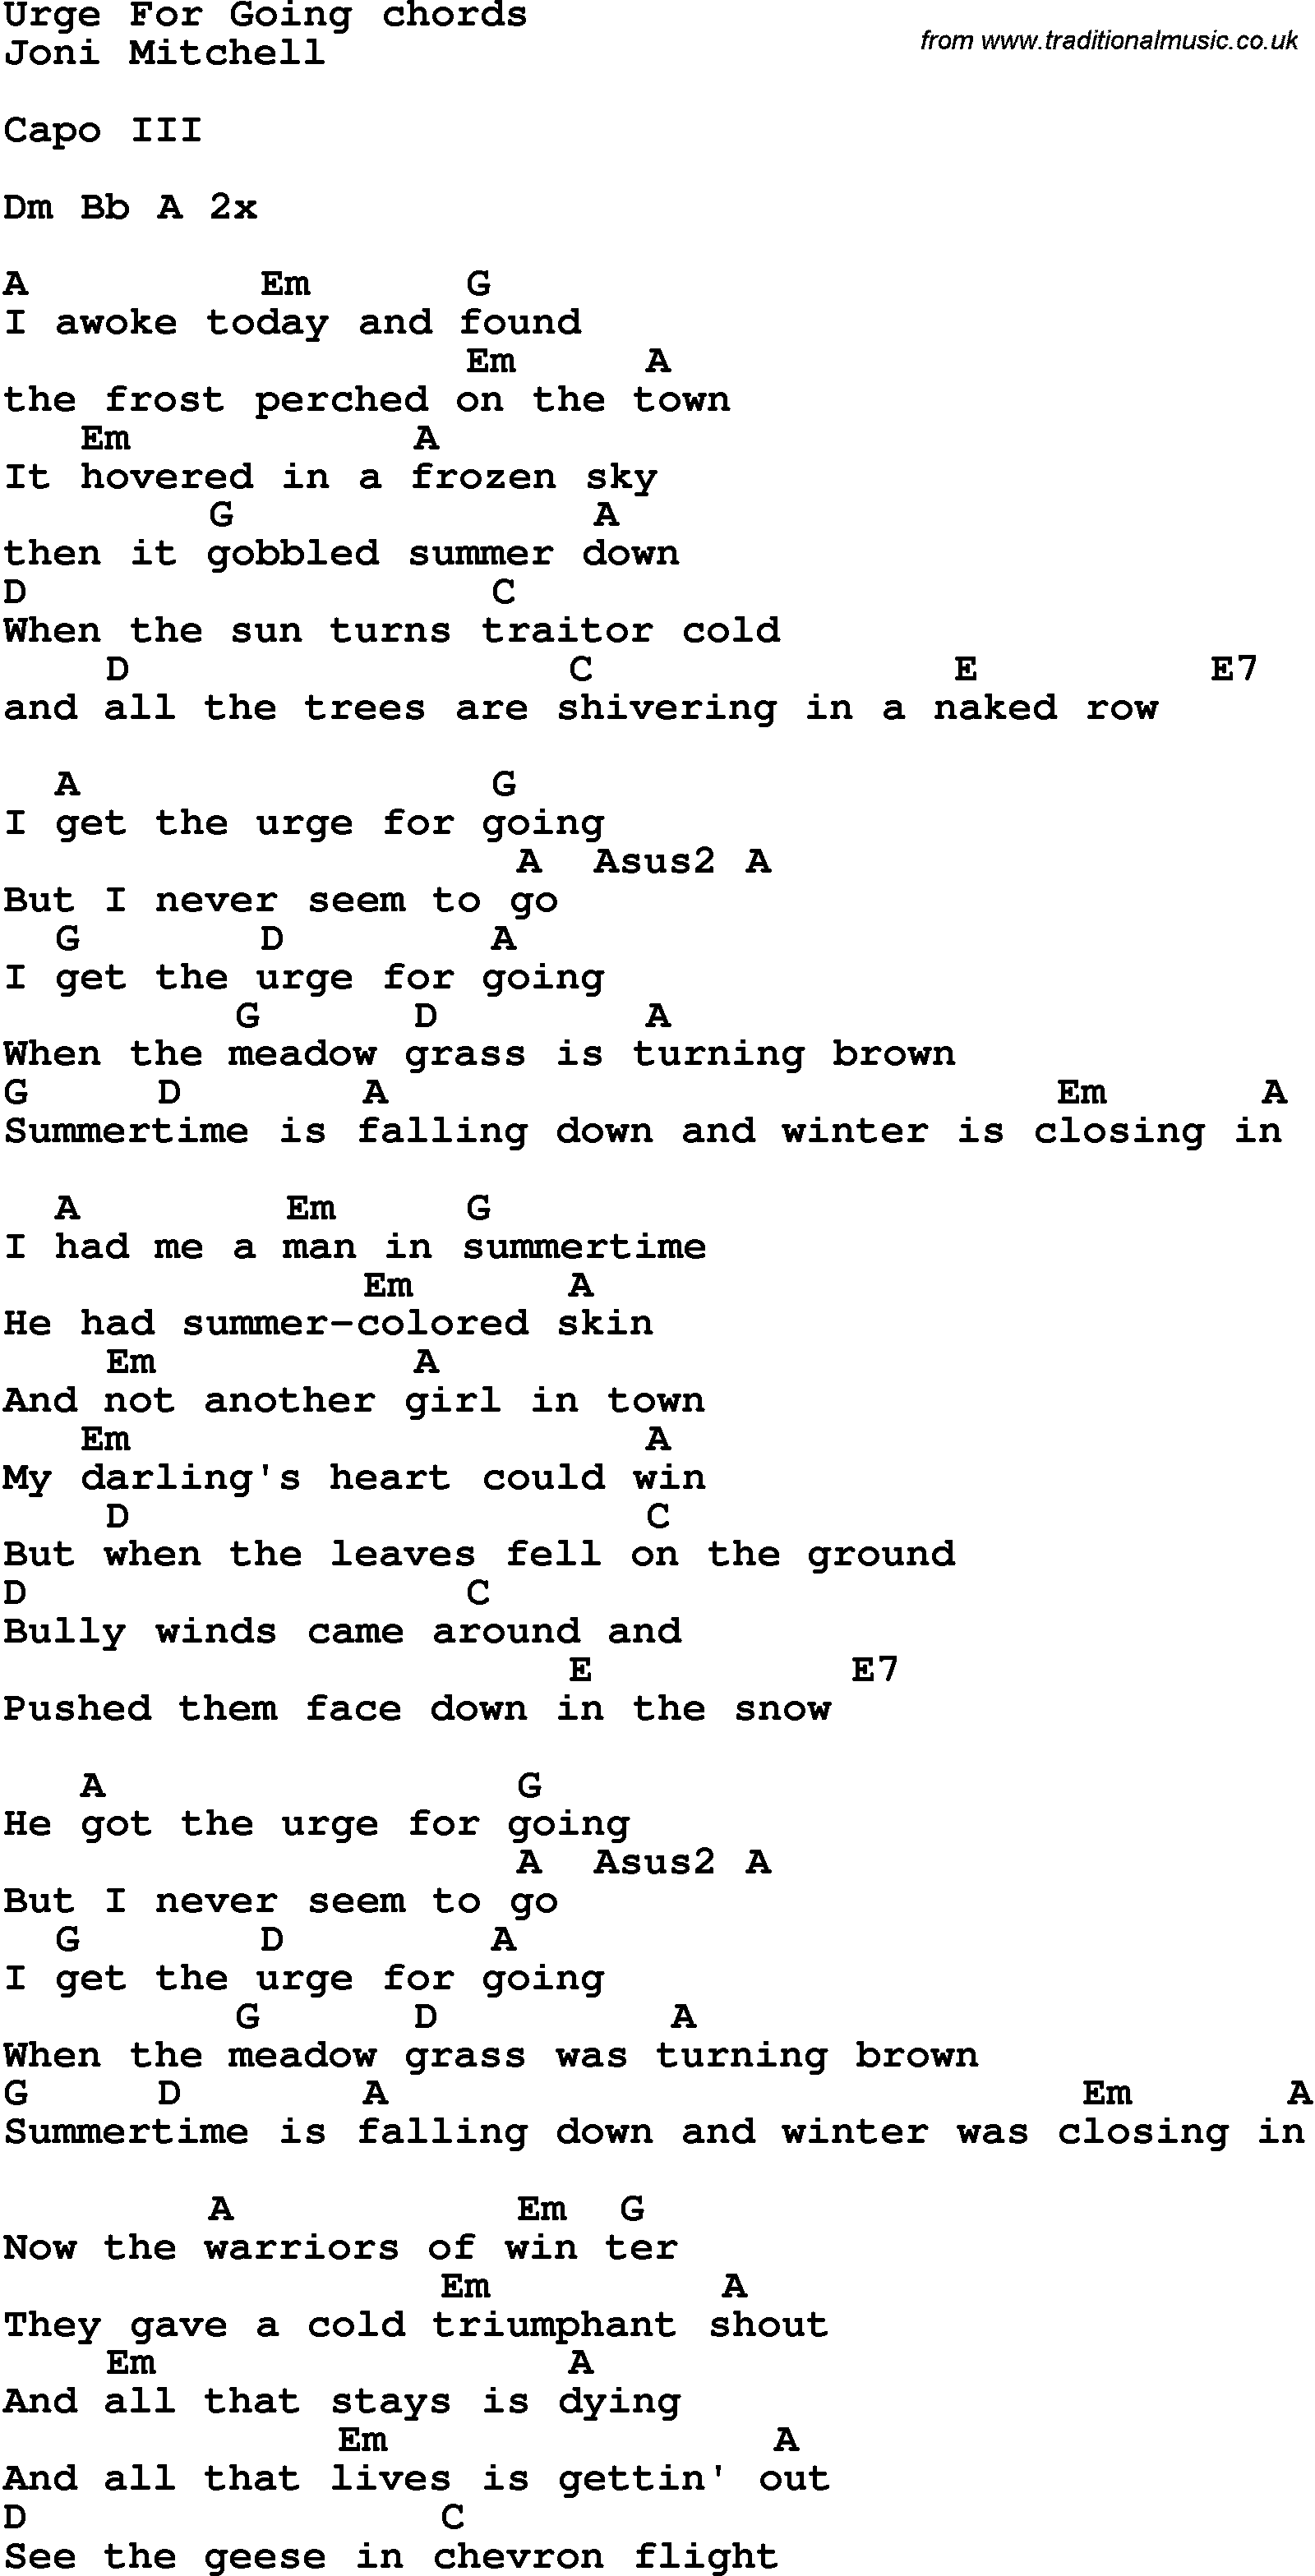 Song Lyrics with guitar chords for Urge For Going